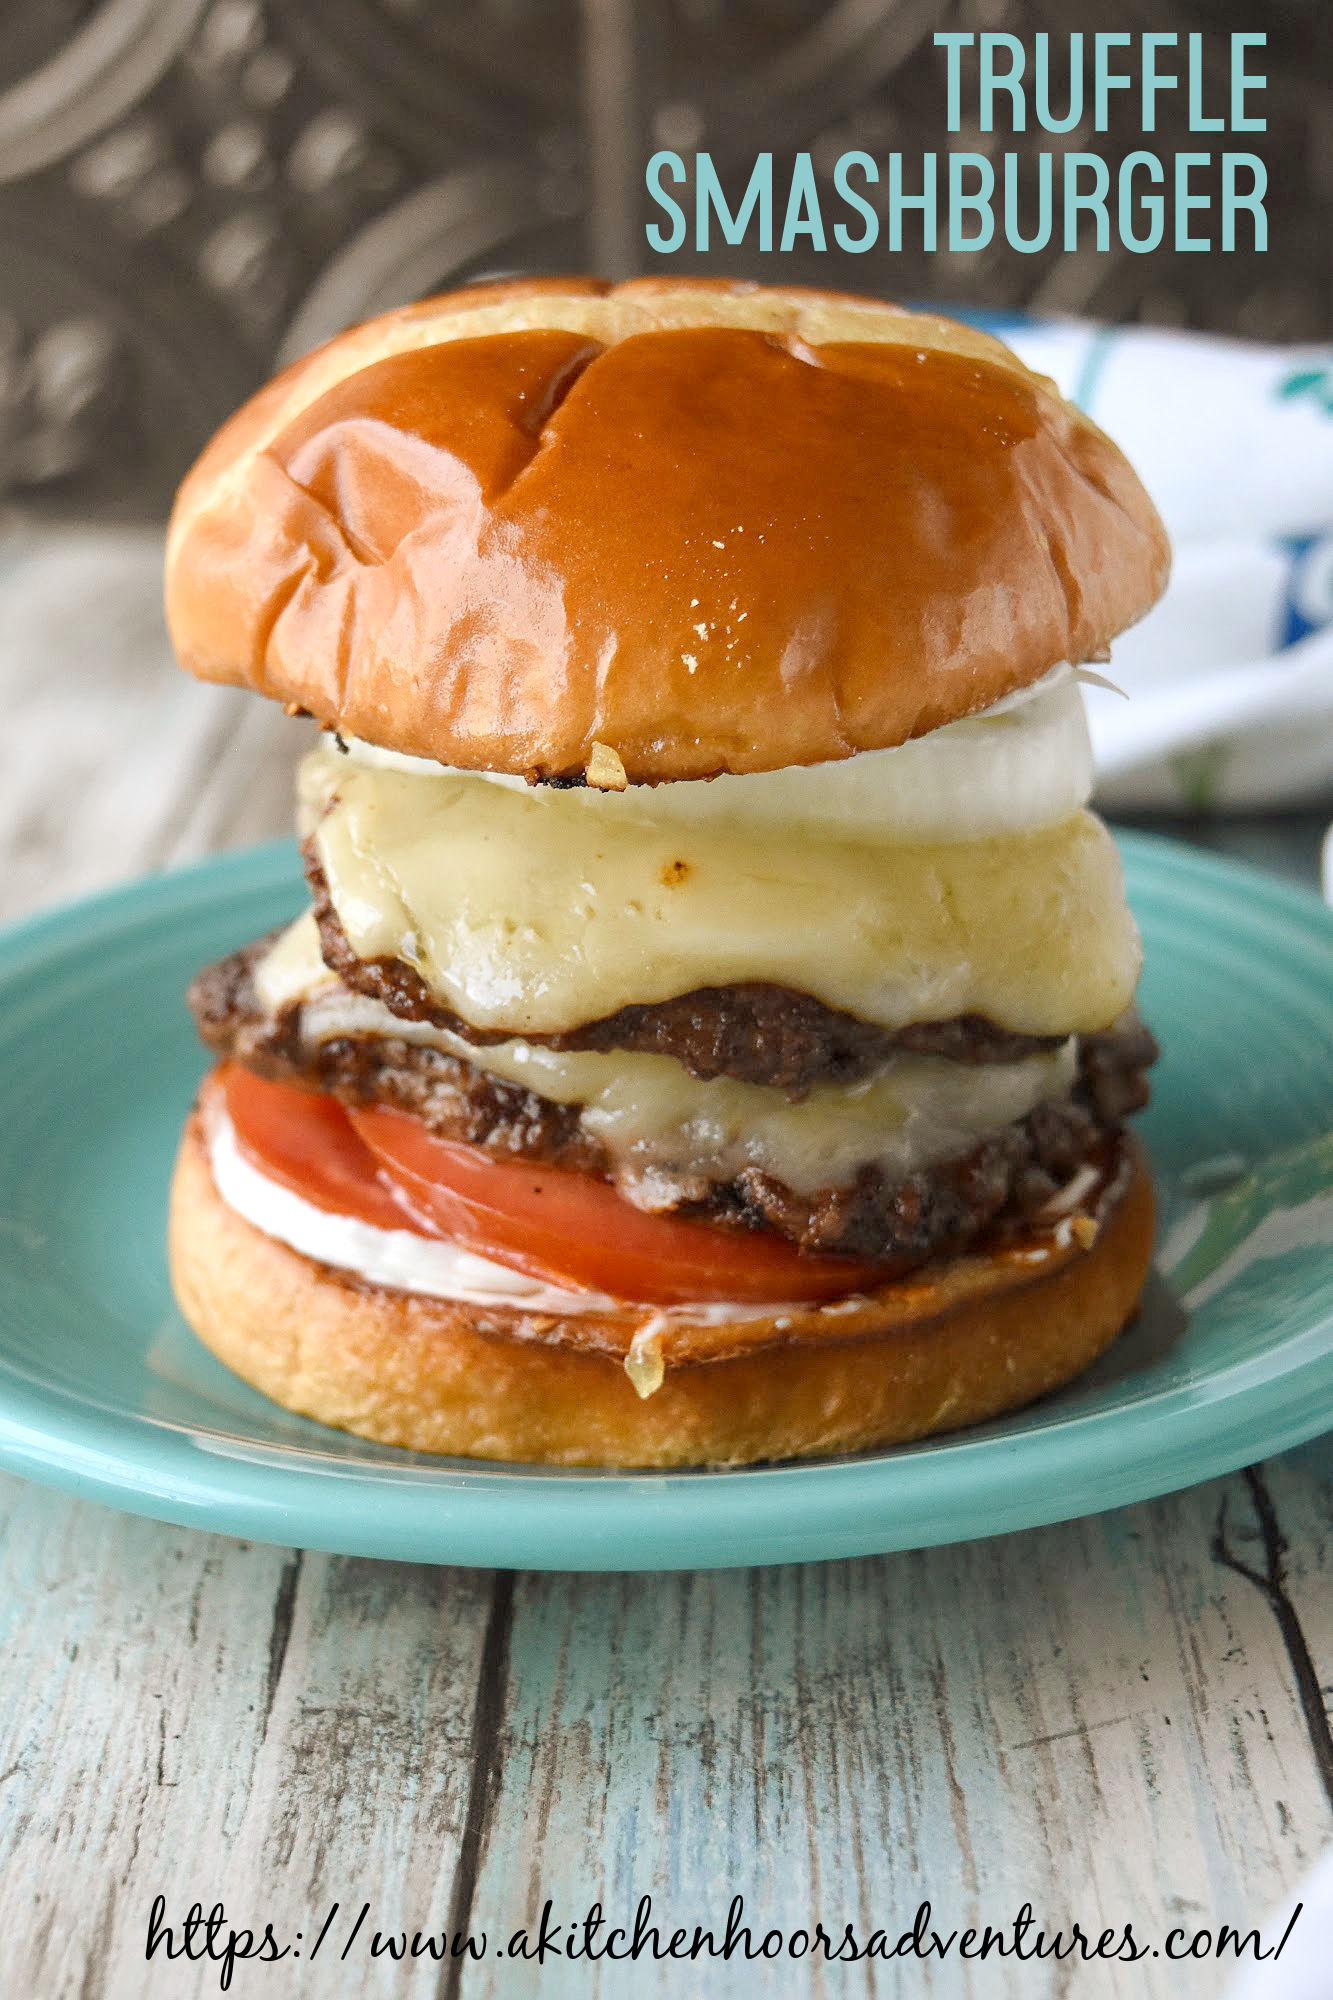 Cheddar cheese. #OurFamilyTable #BurgerMonth